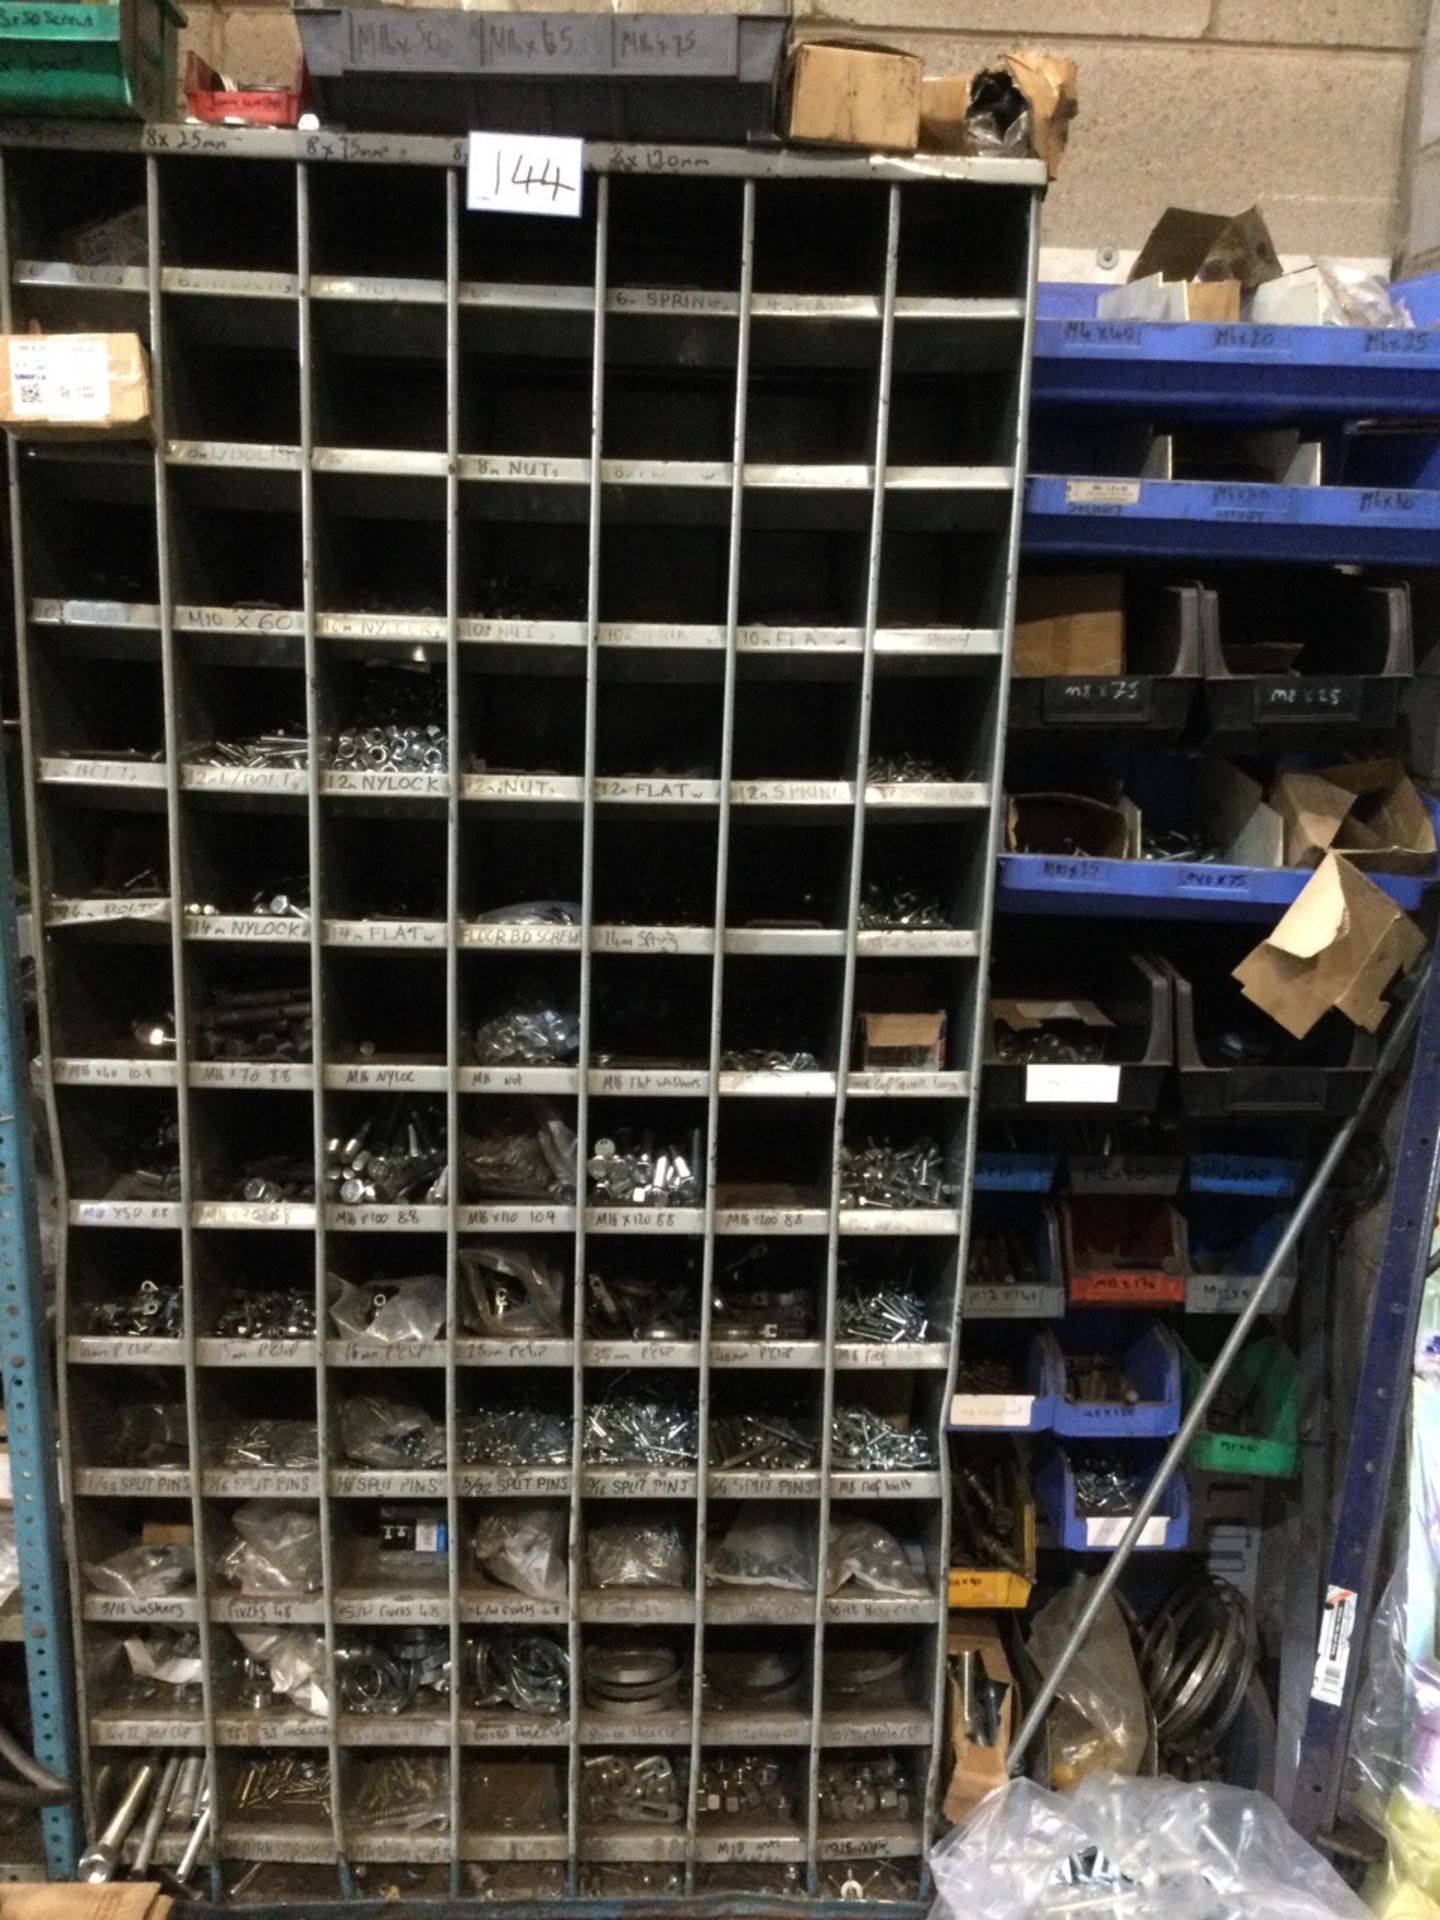 Contents Of Shelf Rack (Split Pins, Bolts, Nuts, Washers Etc.)